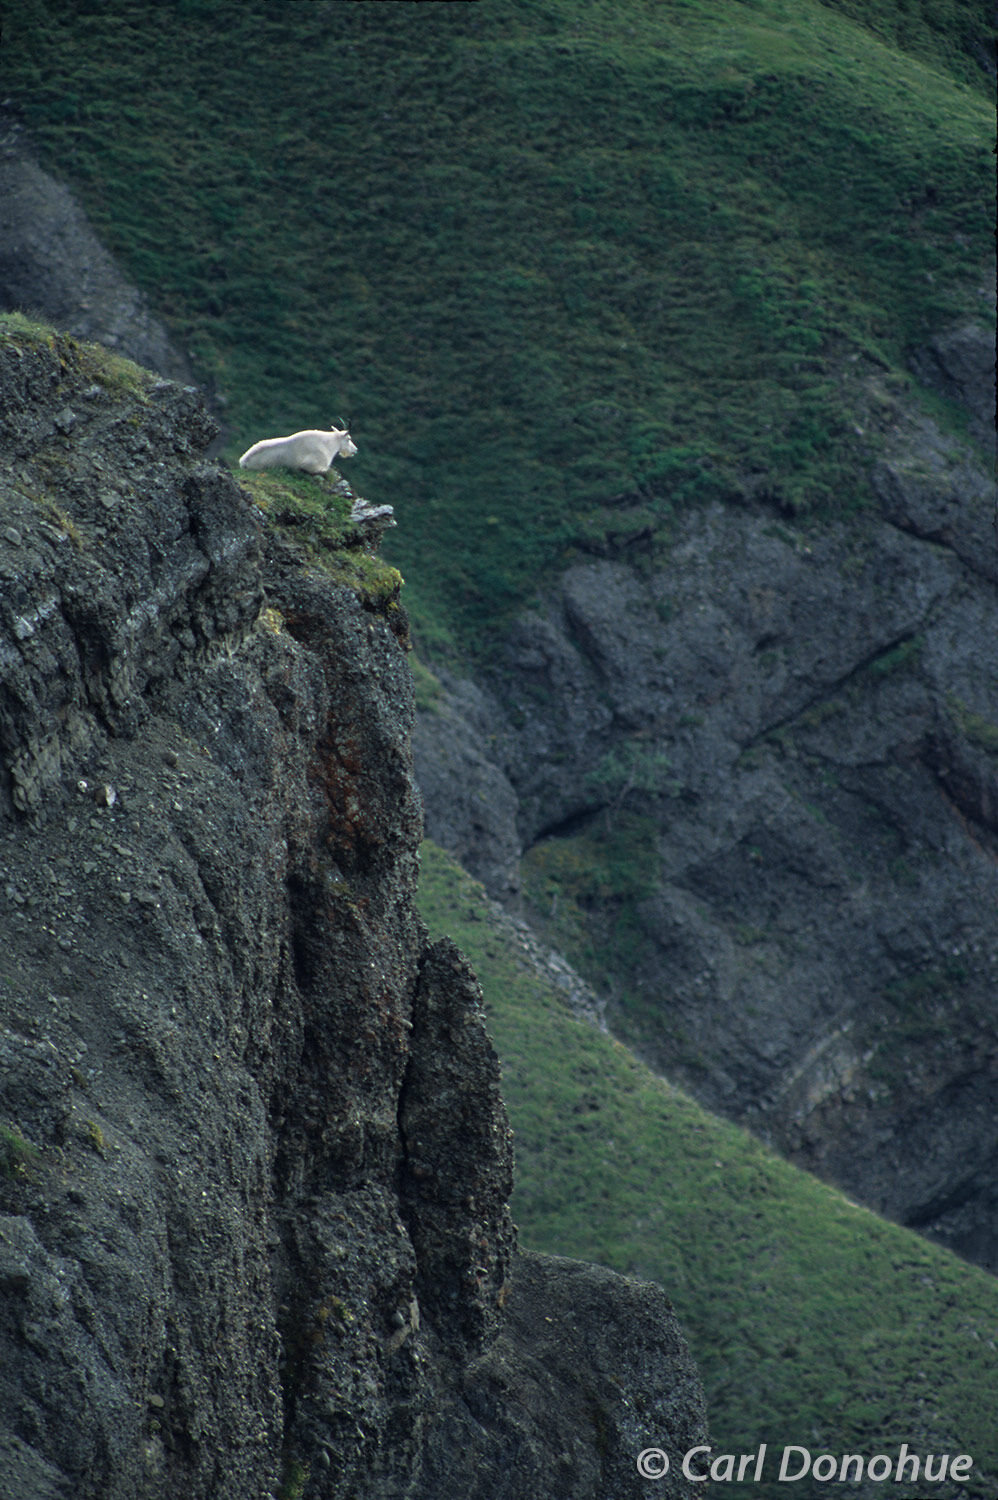 A moment of peaceful solitude for this mountain goat in the stunning landscape of Wrangell-St. Elias National Park. Mountain...